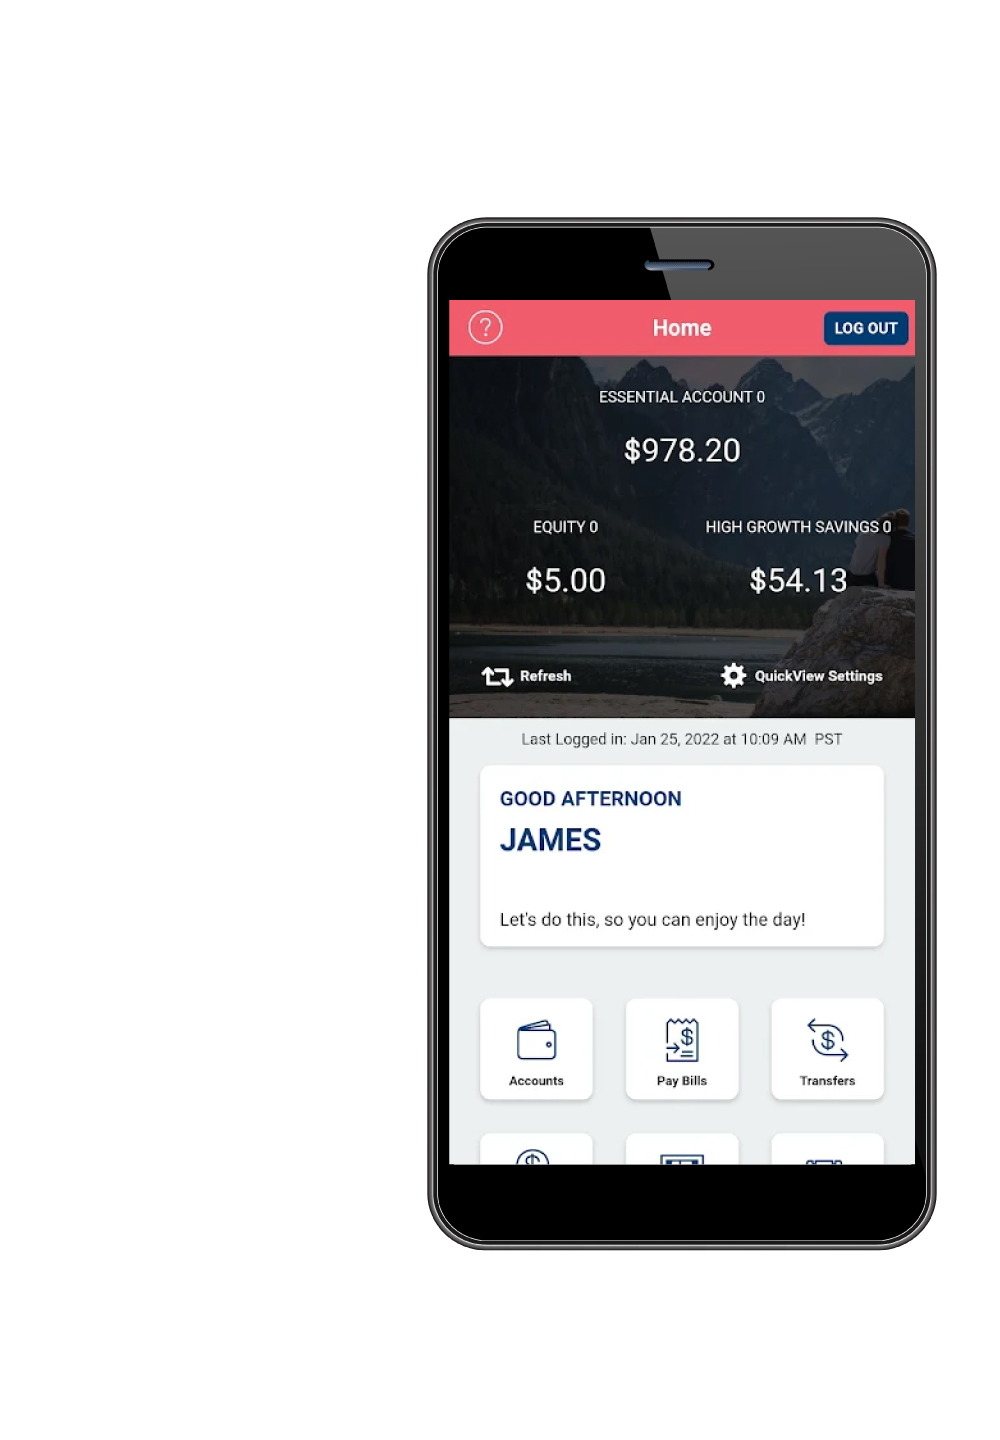 Turn your mobile device into a bank that travels with you.